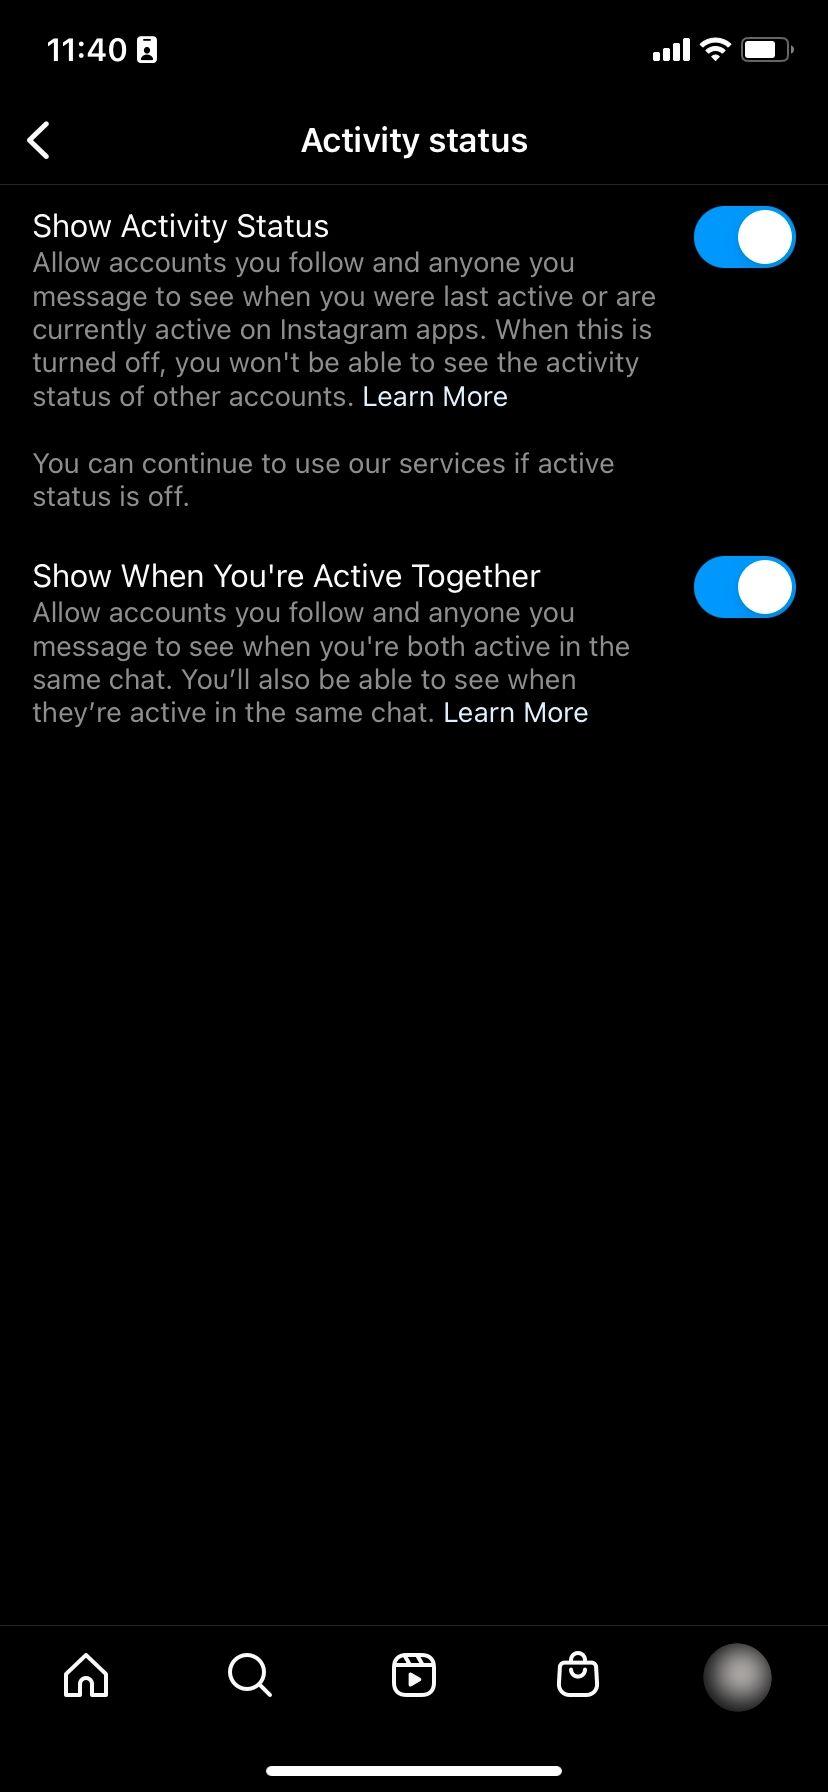 Instagram's Activity status feature enabled